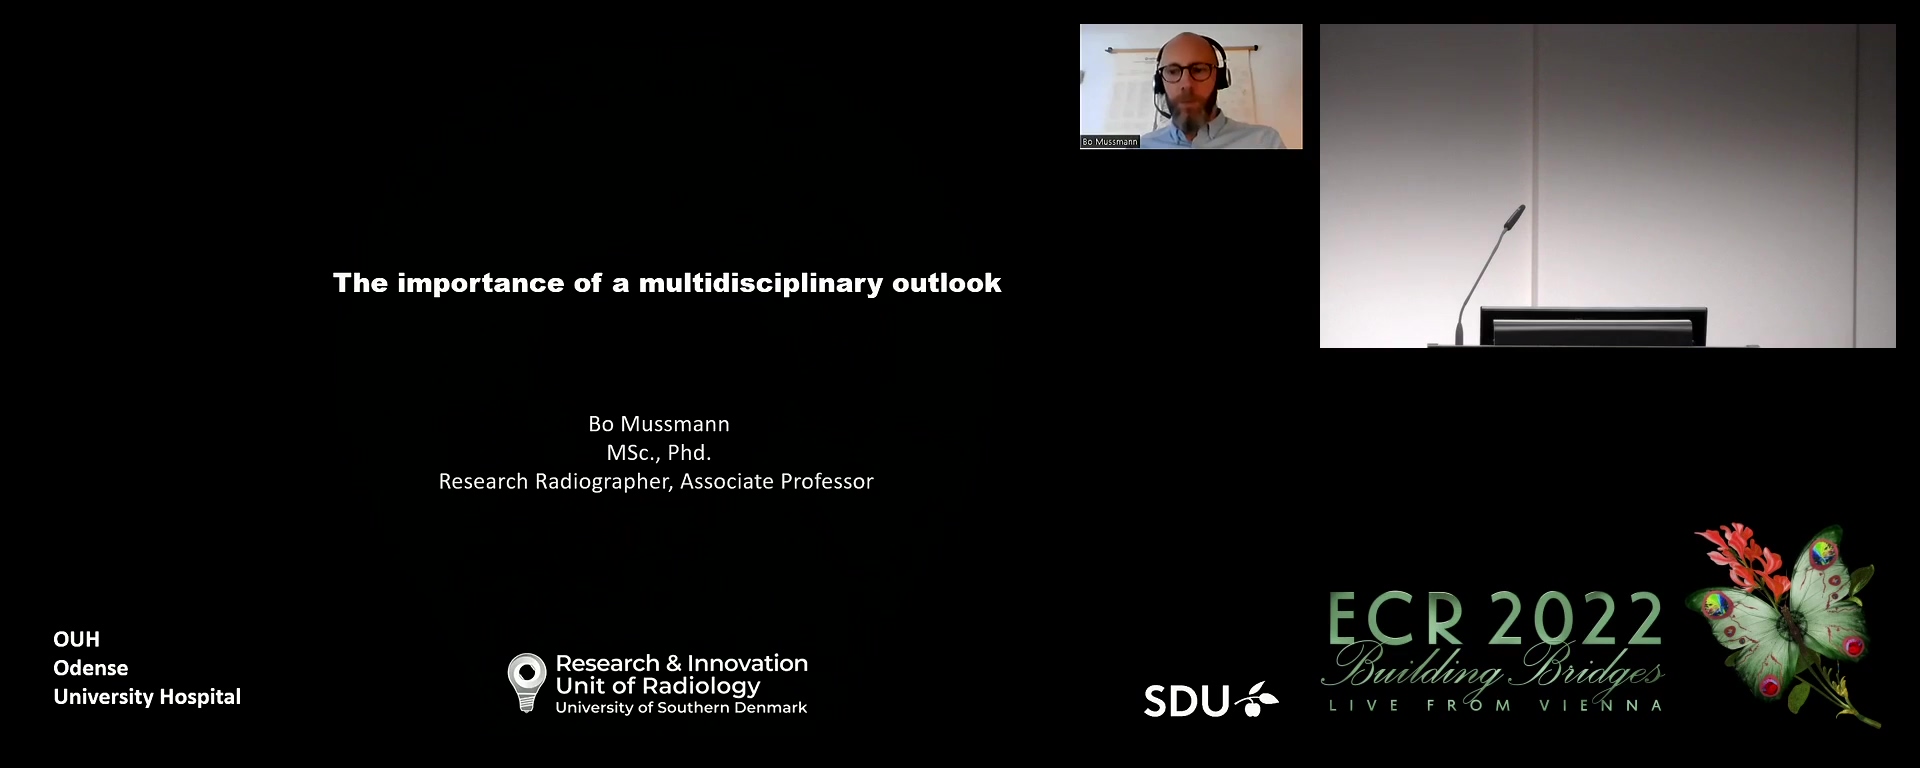 The importance of a multidisciplinary outlook - Bo R. Mussmann, Odense / DK